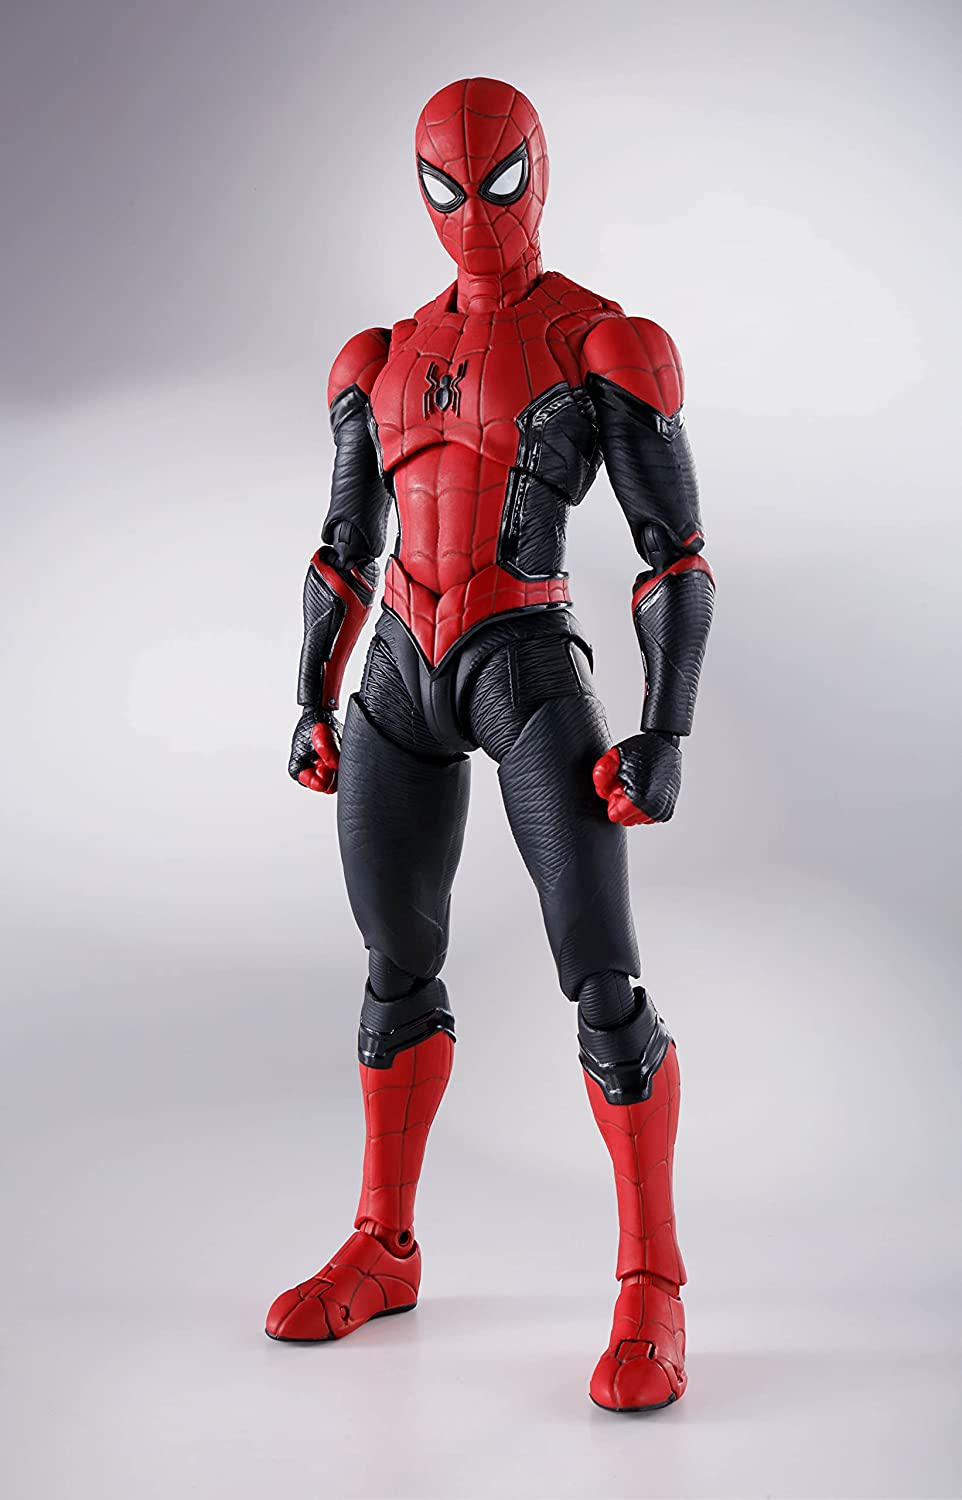 Tamashi Nations Figure - Spider-Man: Now Way Home - Spider-Man (Upgraded Suit)